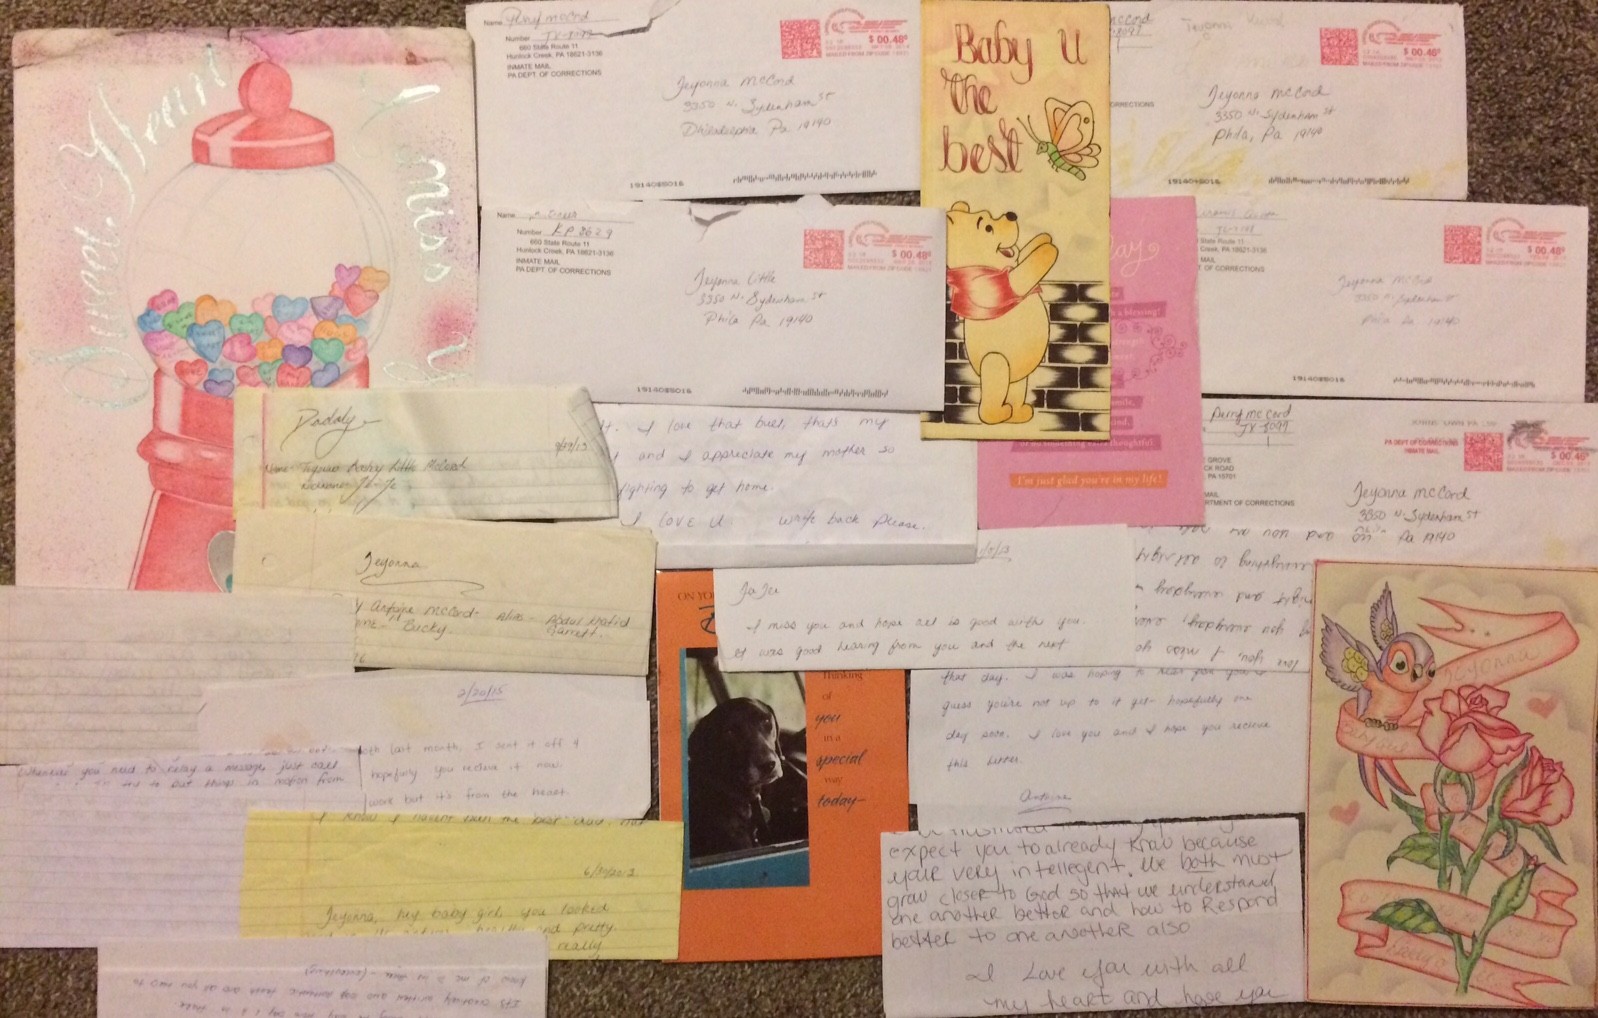 Just a few of the letters and pictures my father wrote and sent to me throughout the years of his incarceration.